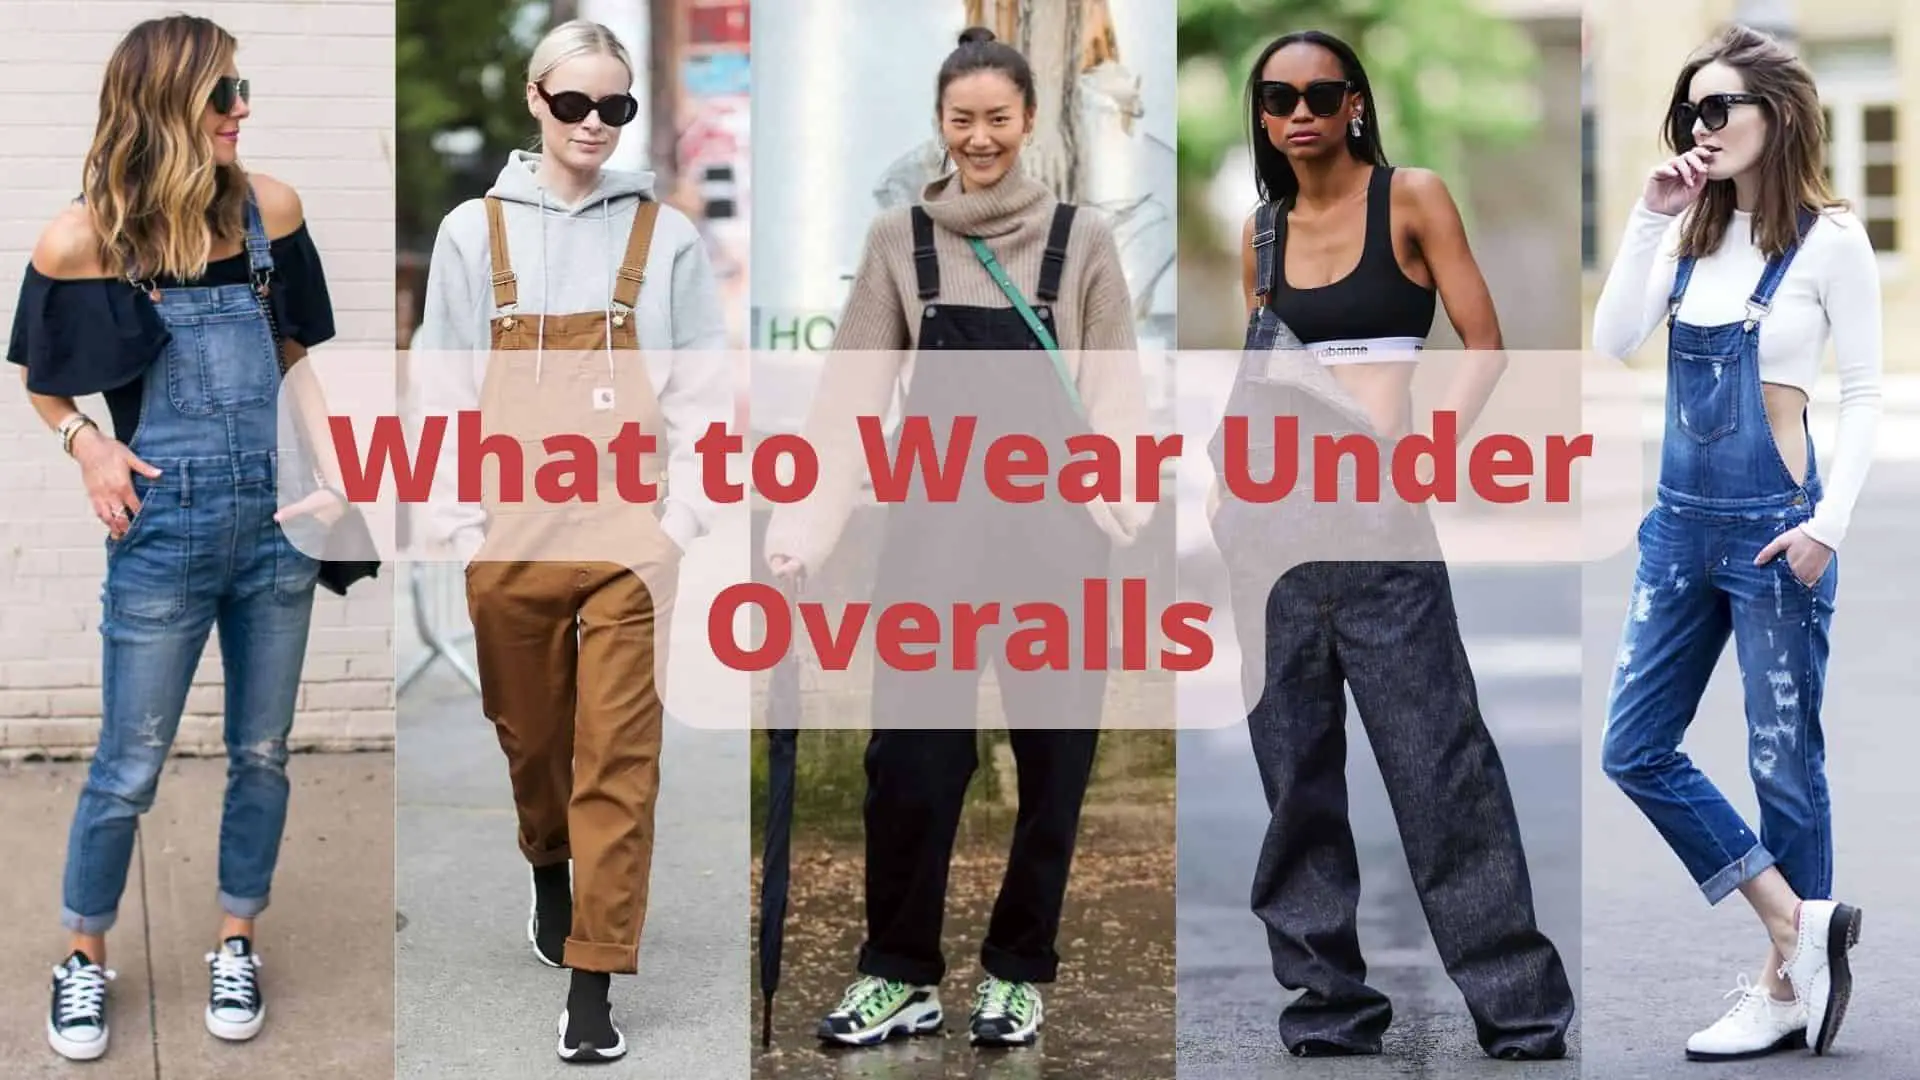 What to Wear Under Overalls